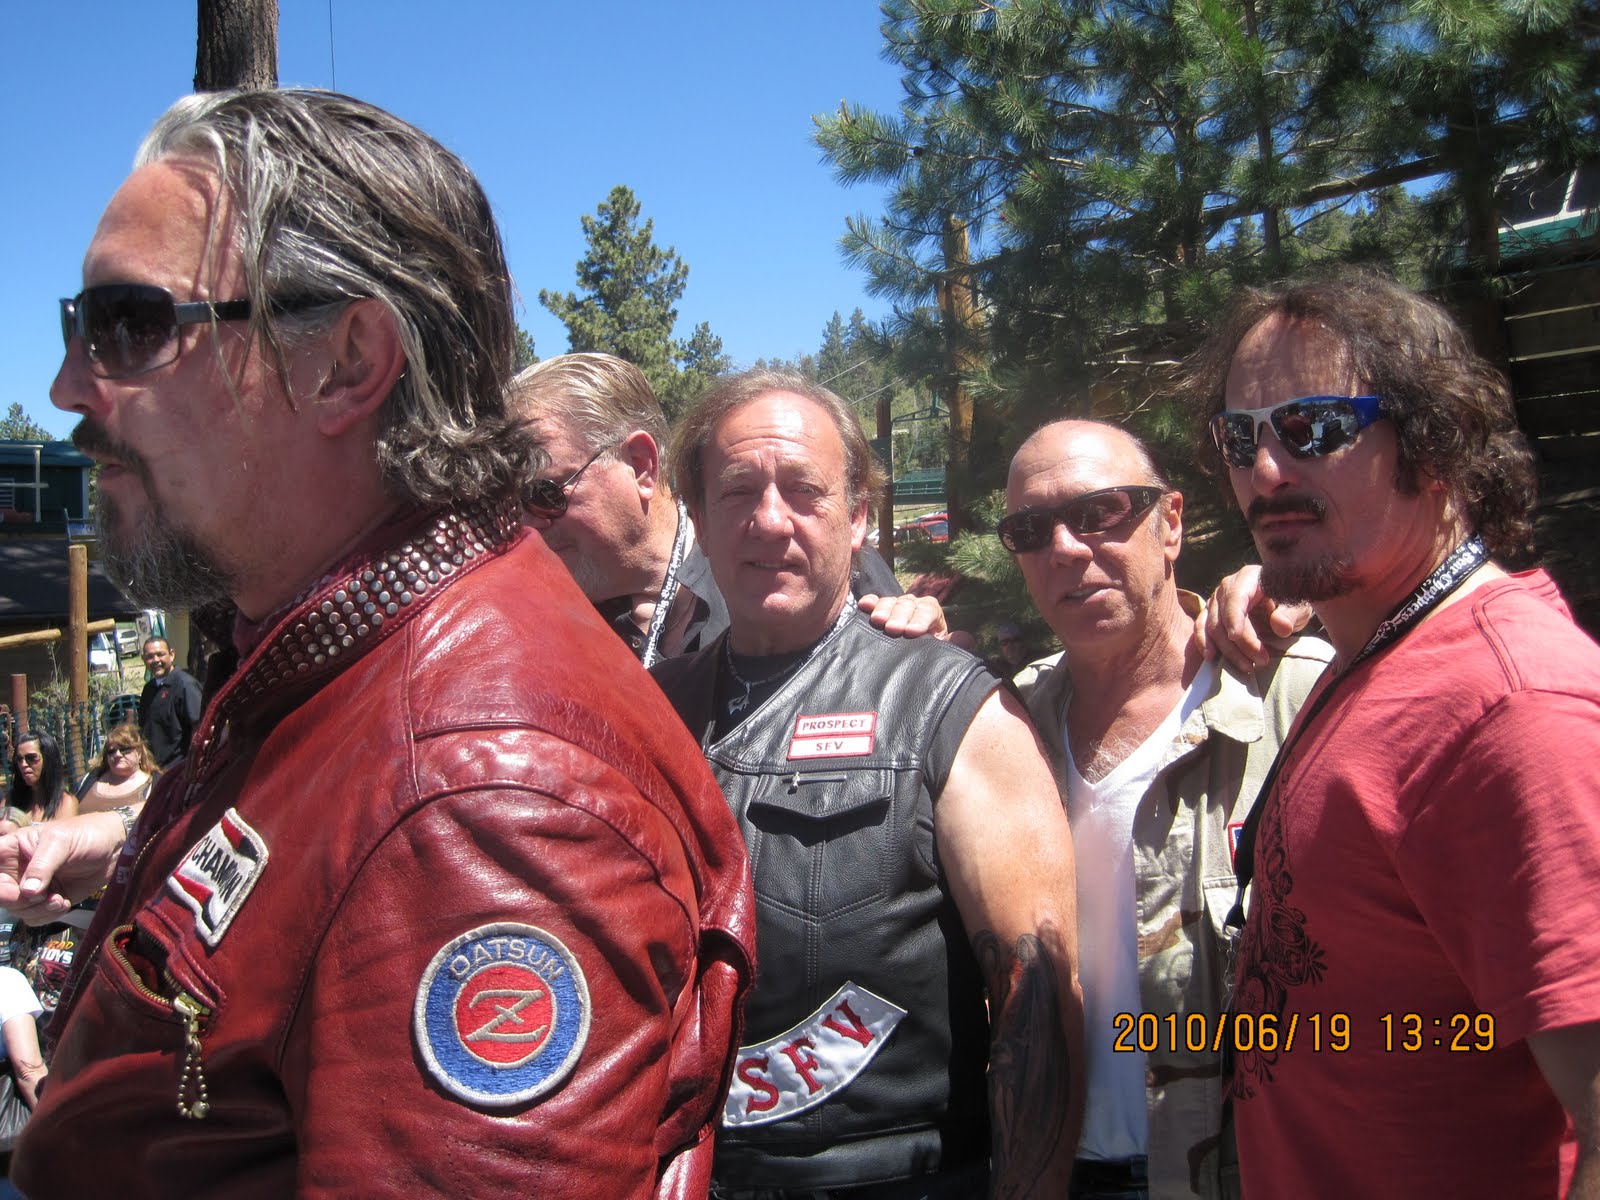 Bikers Of America, Know Your Rights!: TENNESSEE AND THUNDER ON THE MOUNTAIN